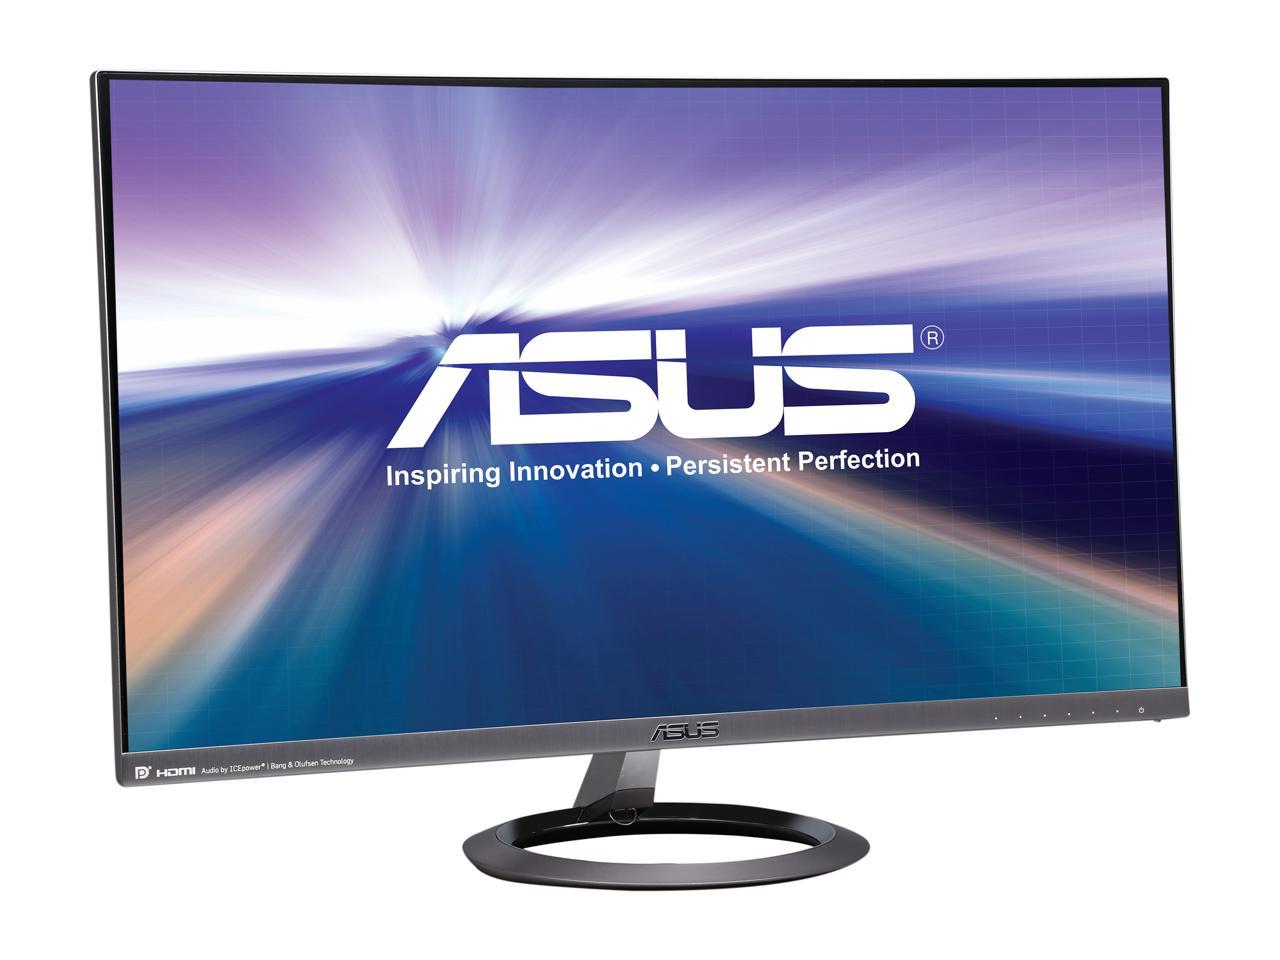 ASUS MX27AQ Space Gray + Black 27" WQHD 5ms HDMI Widescreen LED Backlight LCD Monitor IPS 300 cd/m2 100,000,000:1, Built-in Speakers